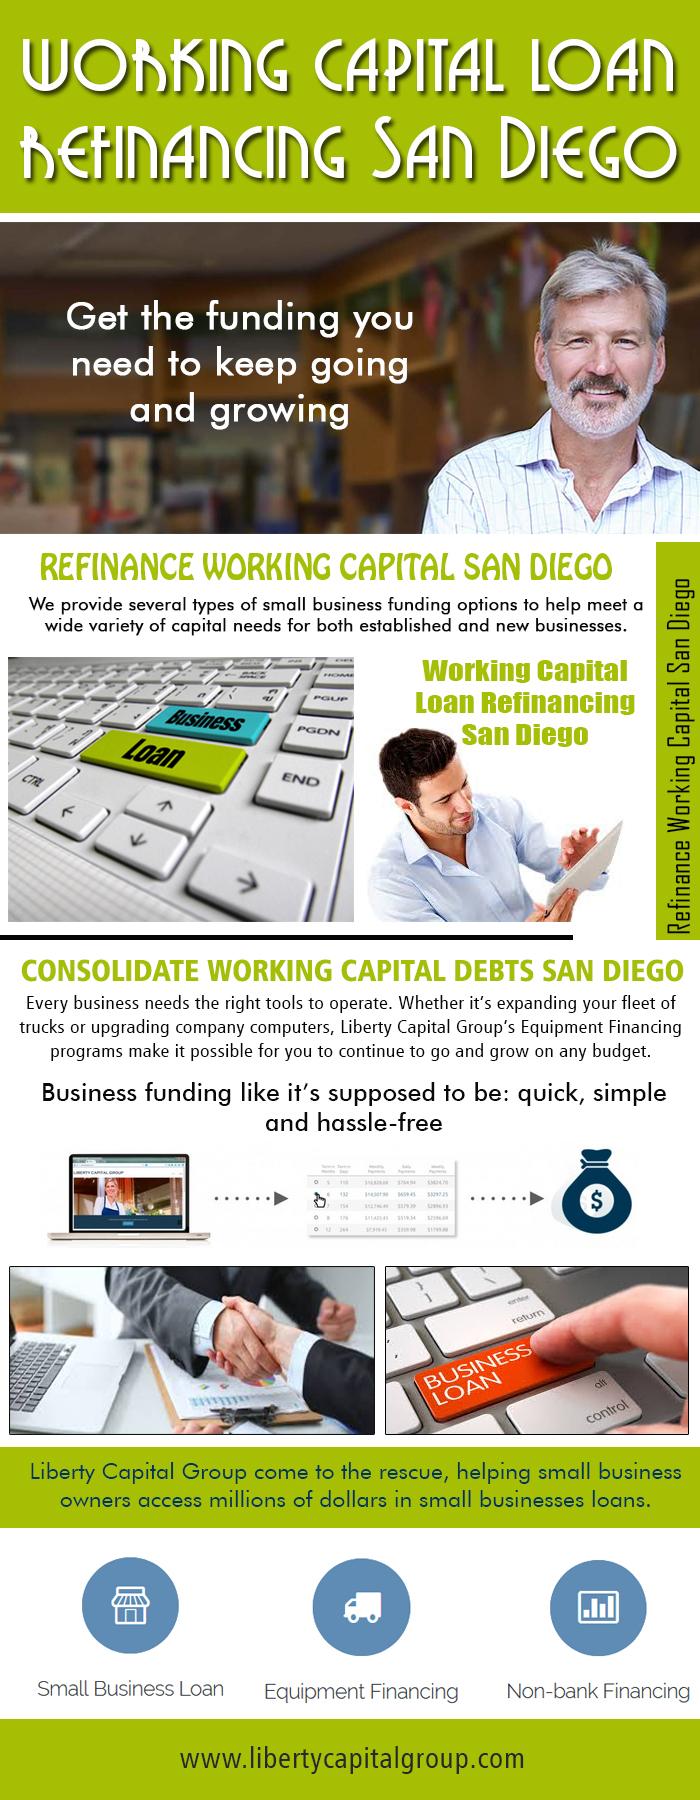 Consolidate Working Capital Debts San Diego